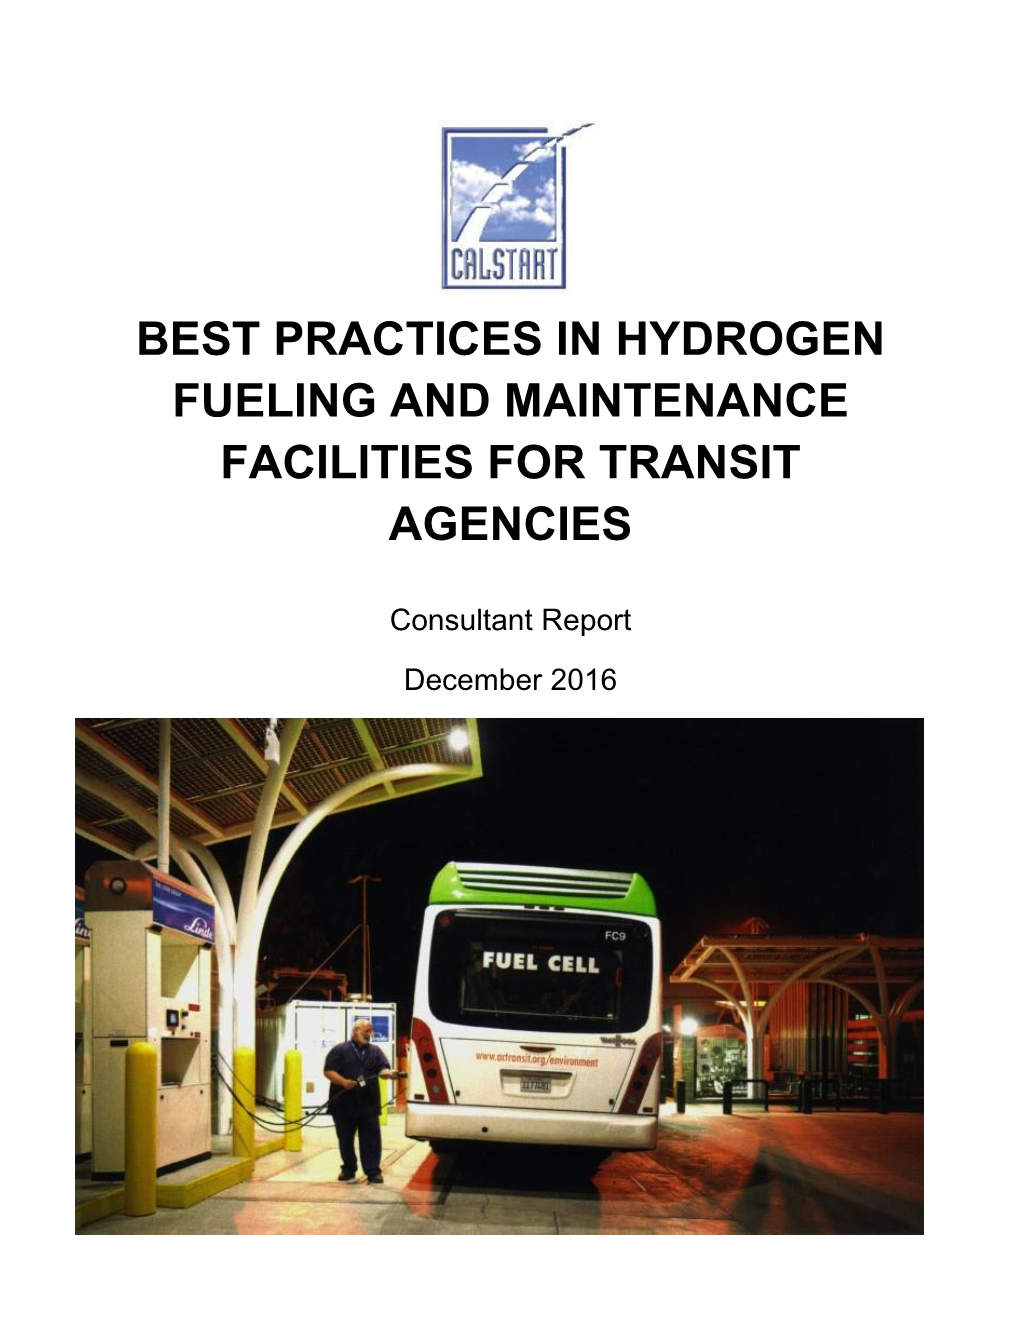 Best Practices in Hydrogen Fueling and Maintenance Facilities for Transit Agencies